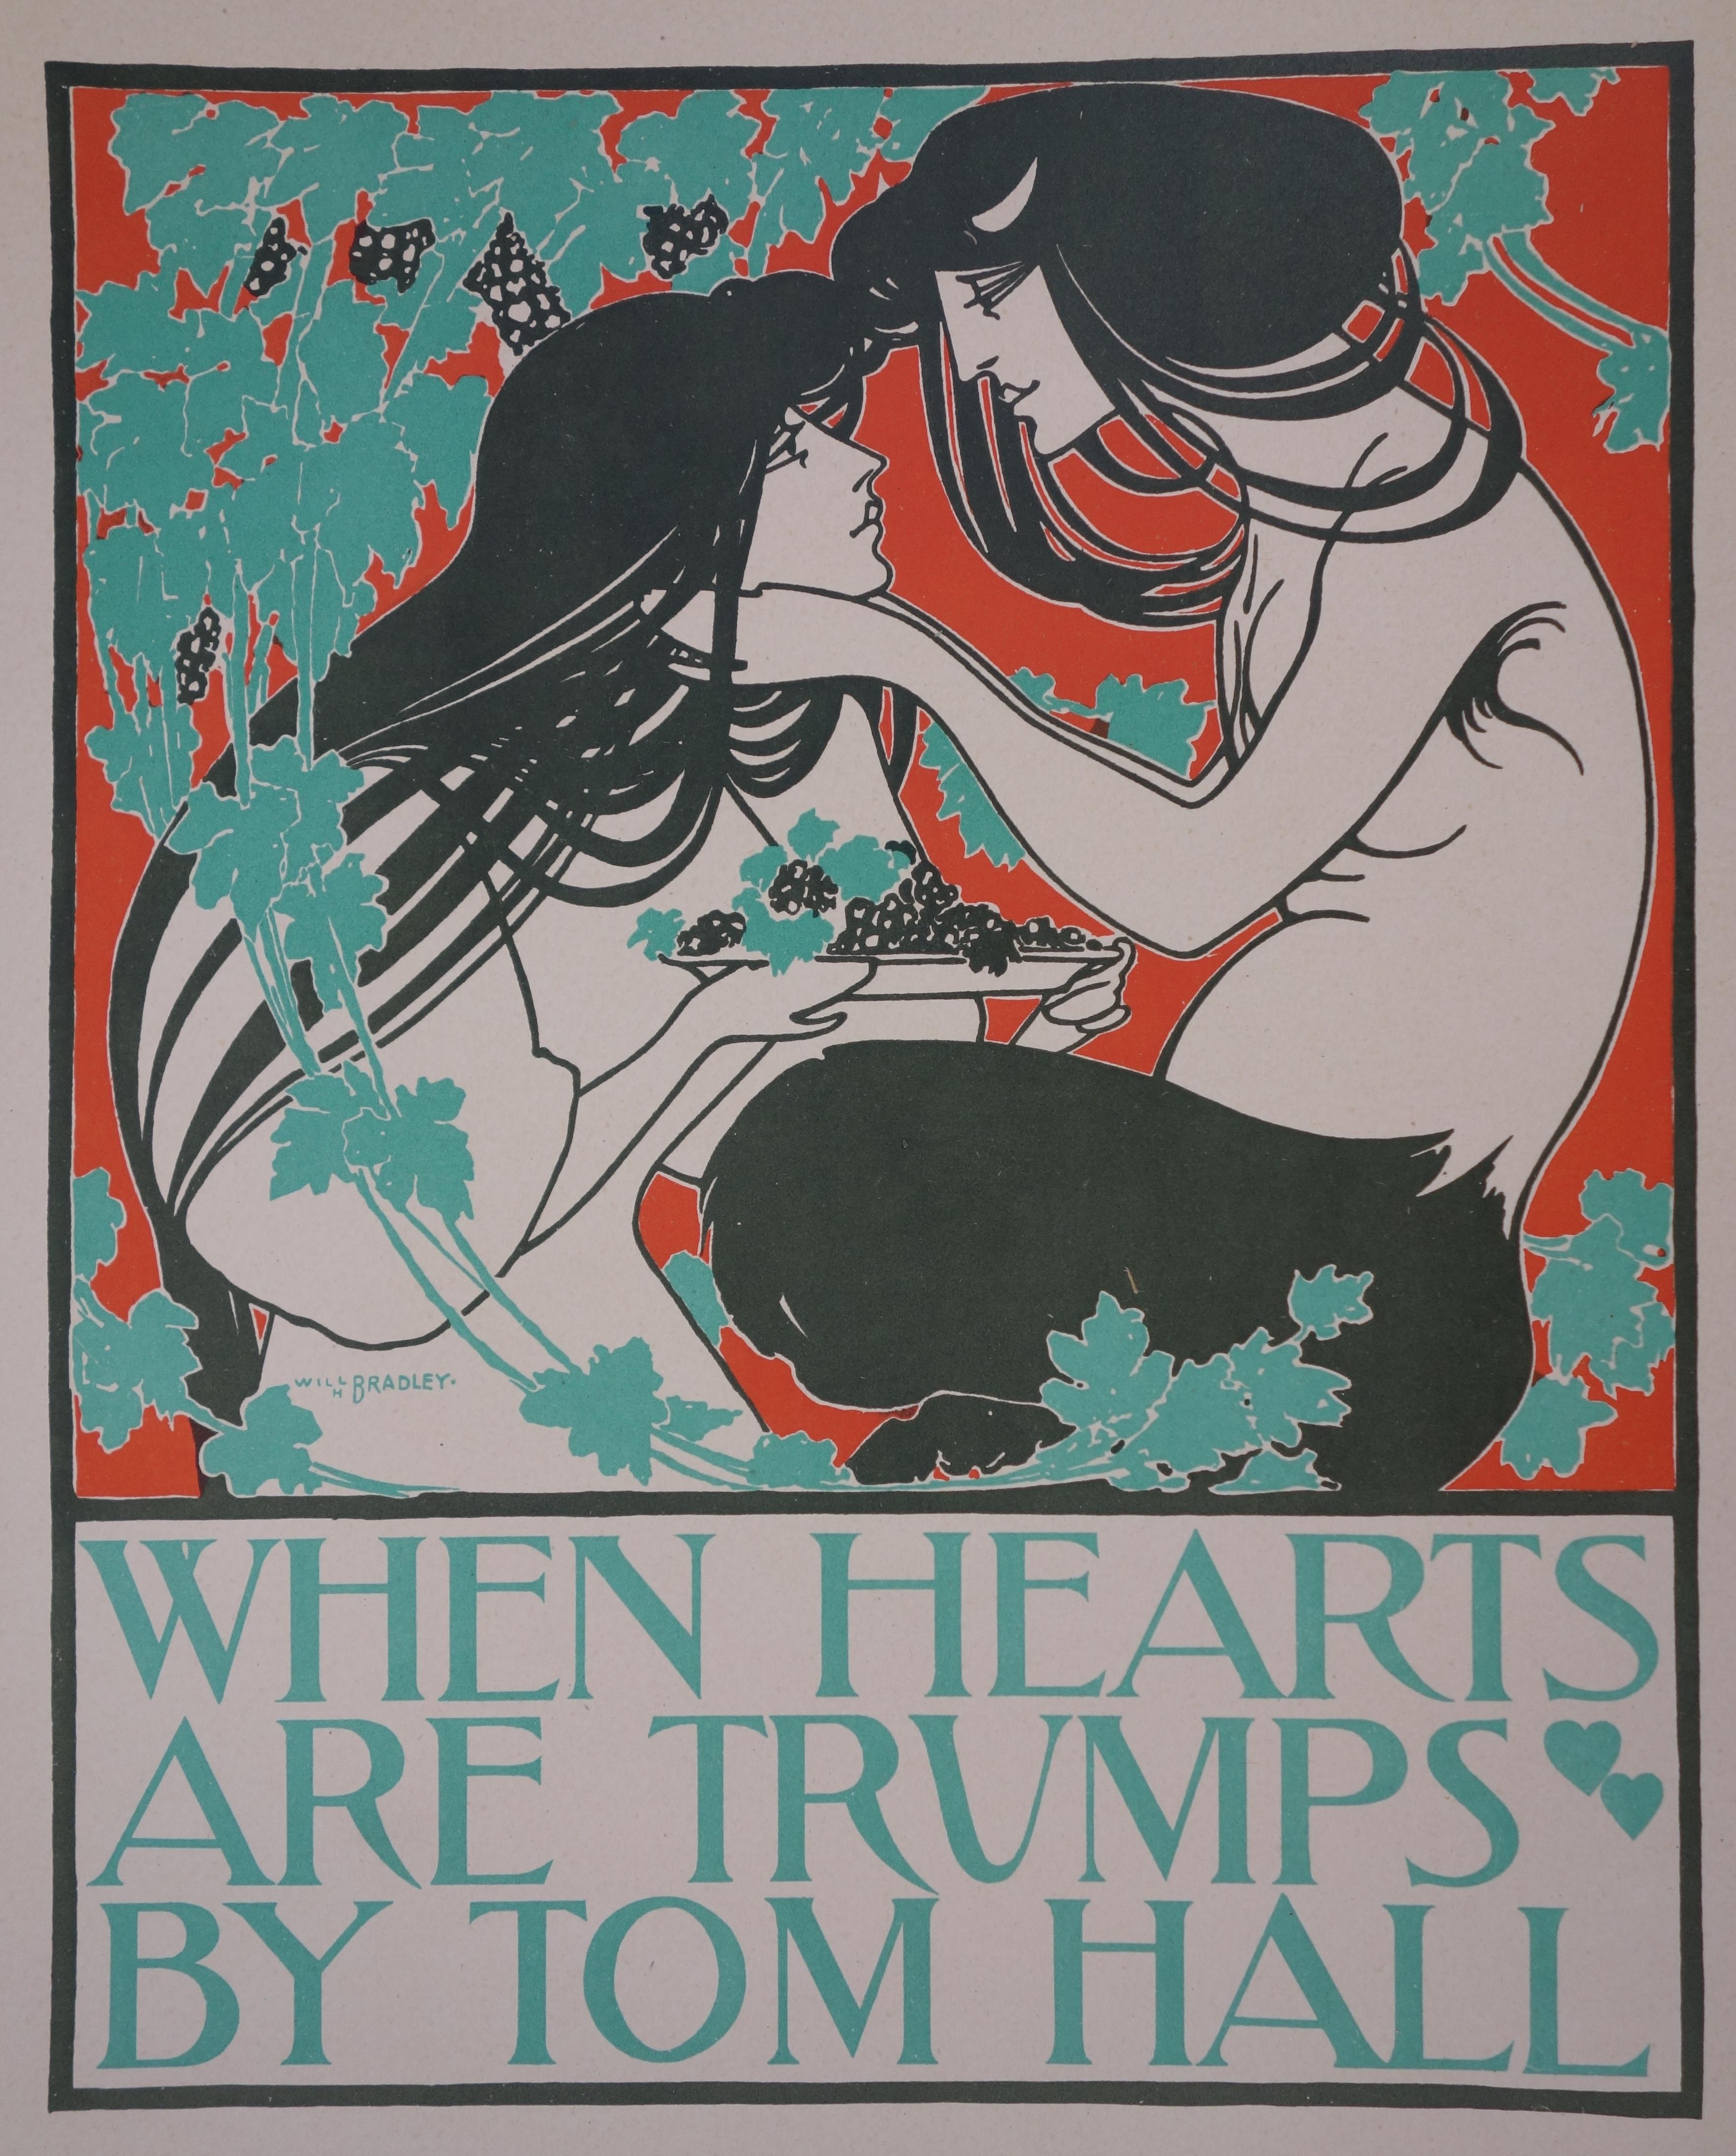 When hearts are trumps - Lithograph, 1896 - Print by Will Bradley